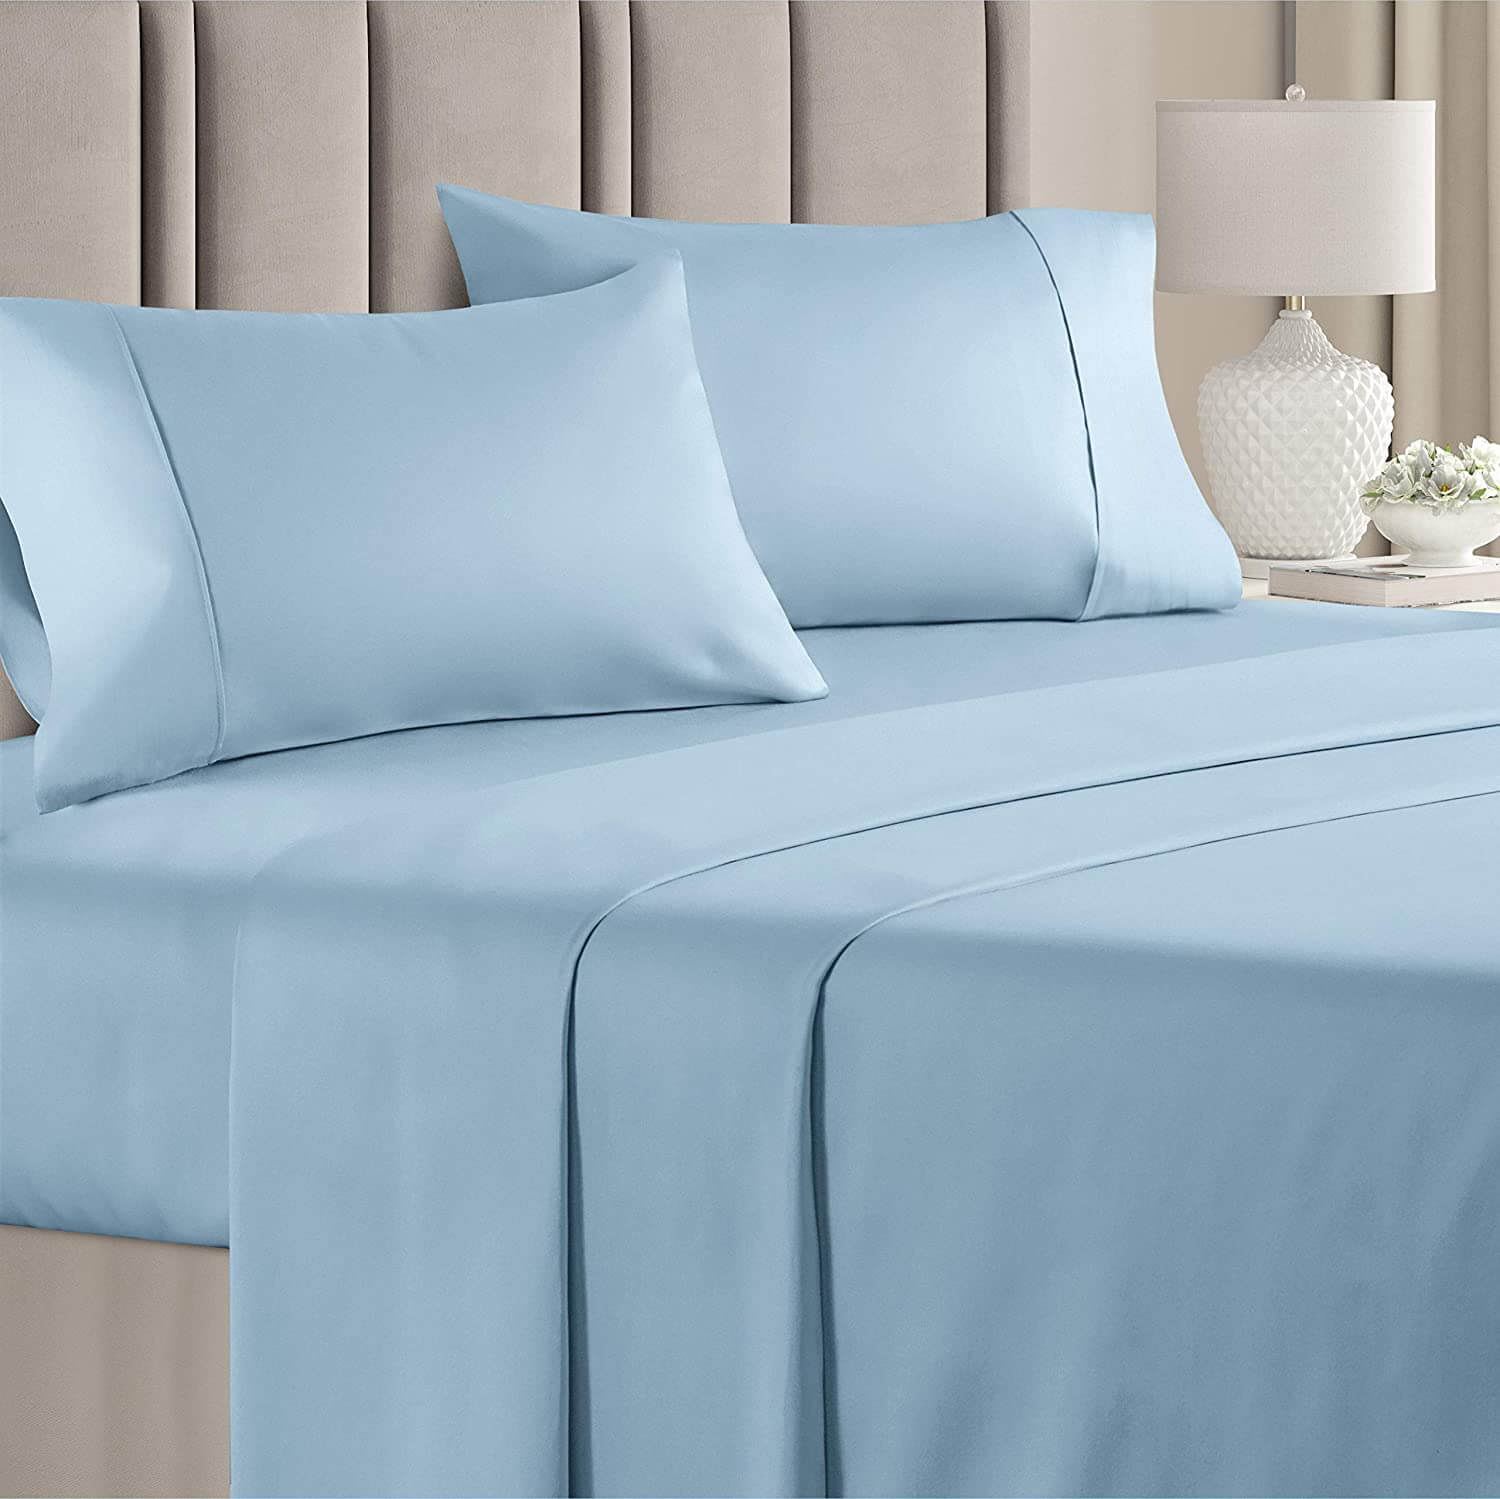 400 Thread Count Cotton - King Size Sheet Set